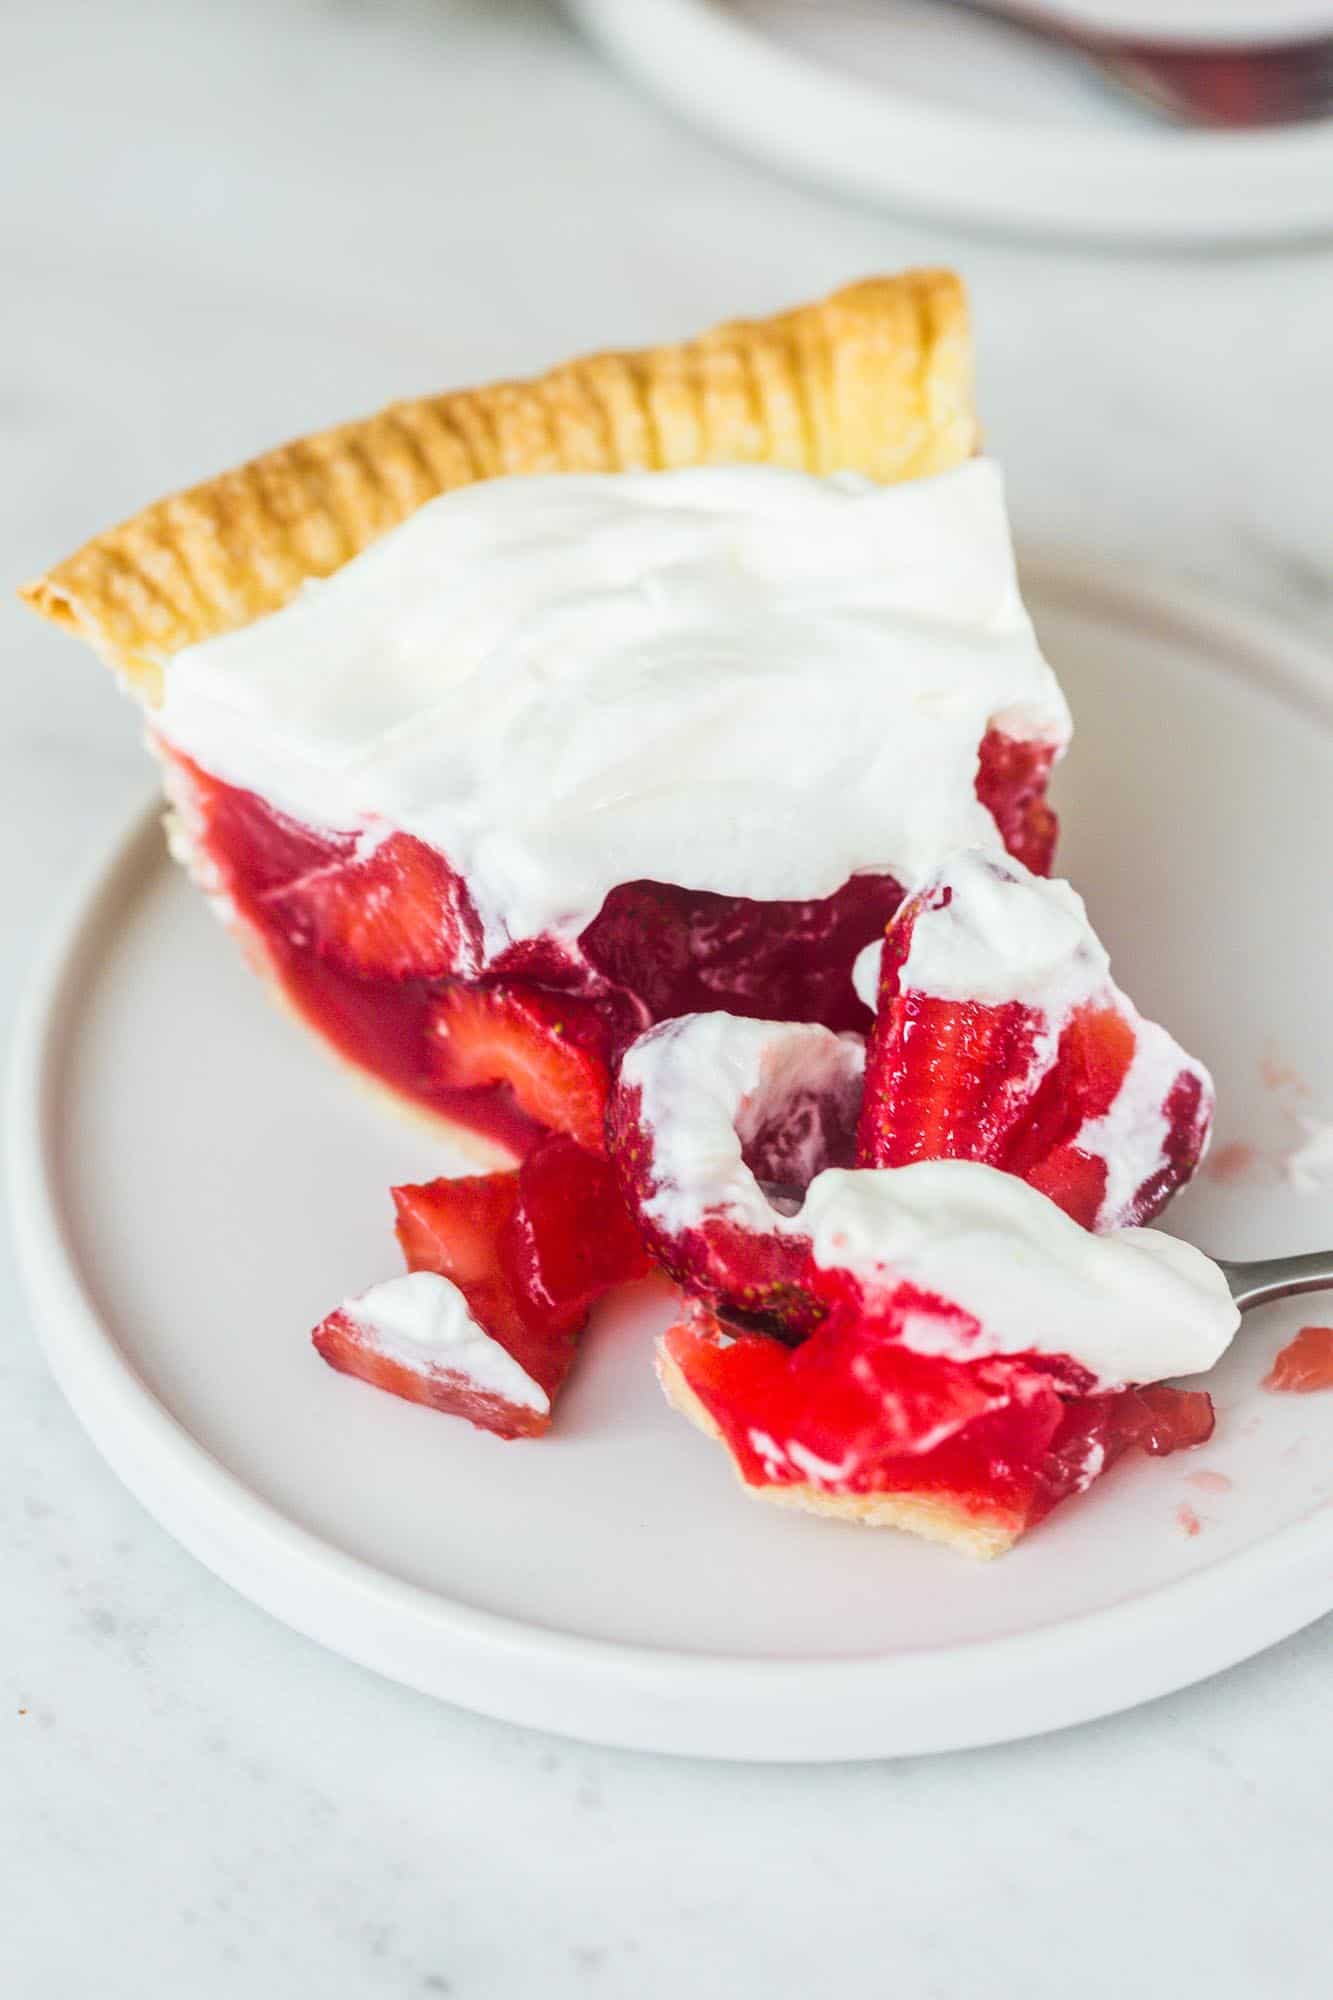 Eating a slice of strawberry pie by breaking it up with a fork